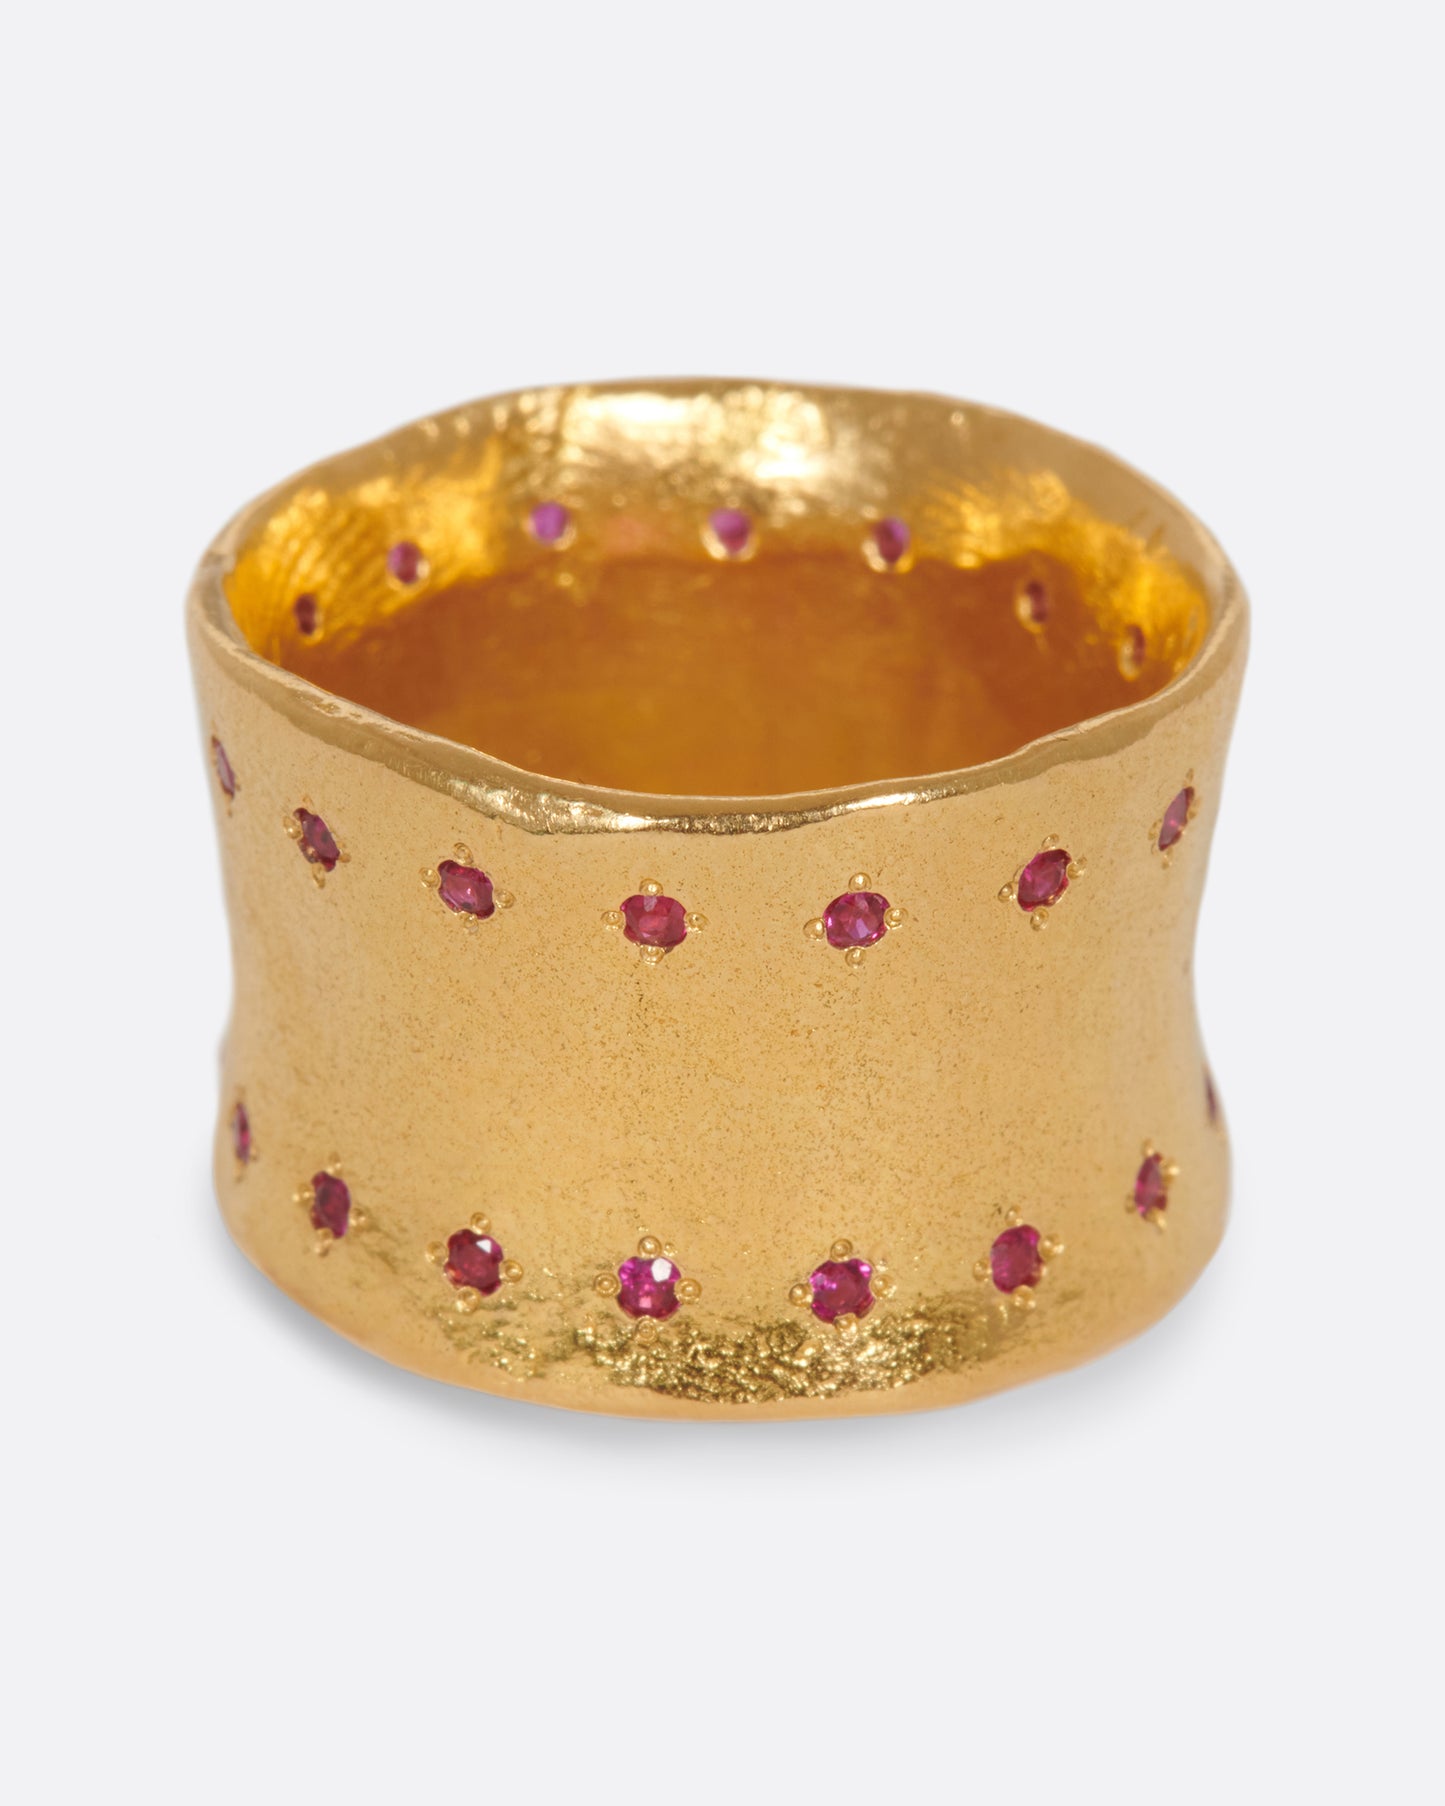 A slightly concave 22k gold band lined with thirty two rubies.